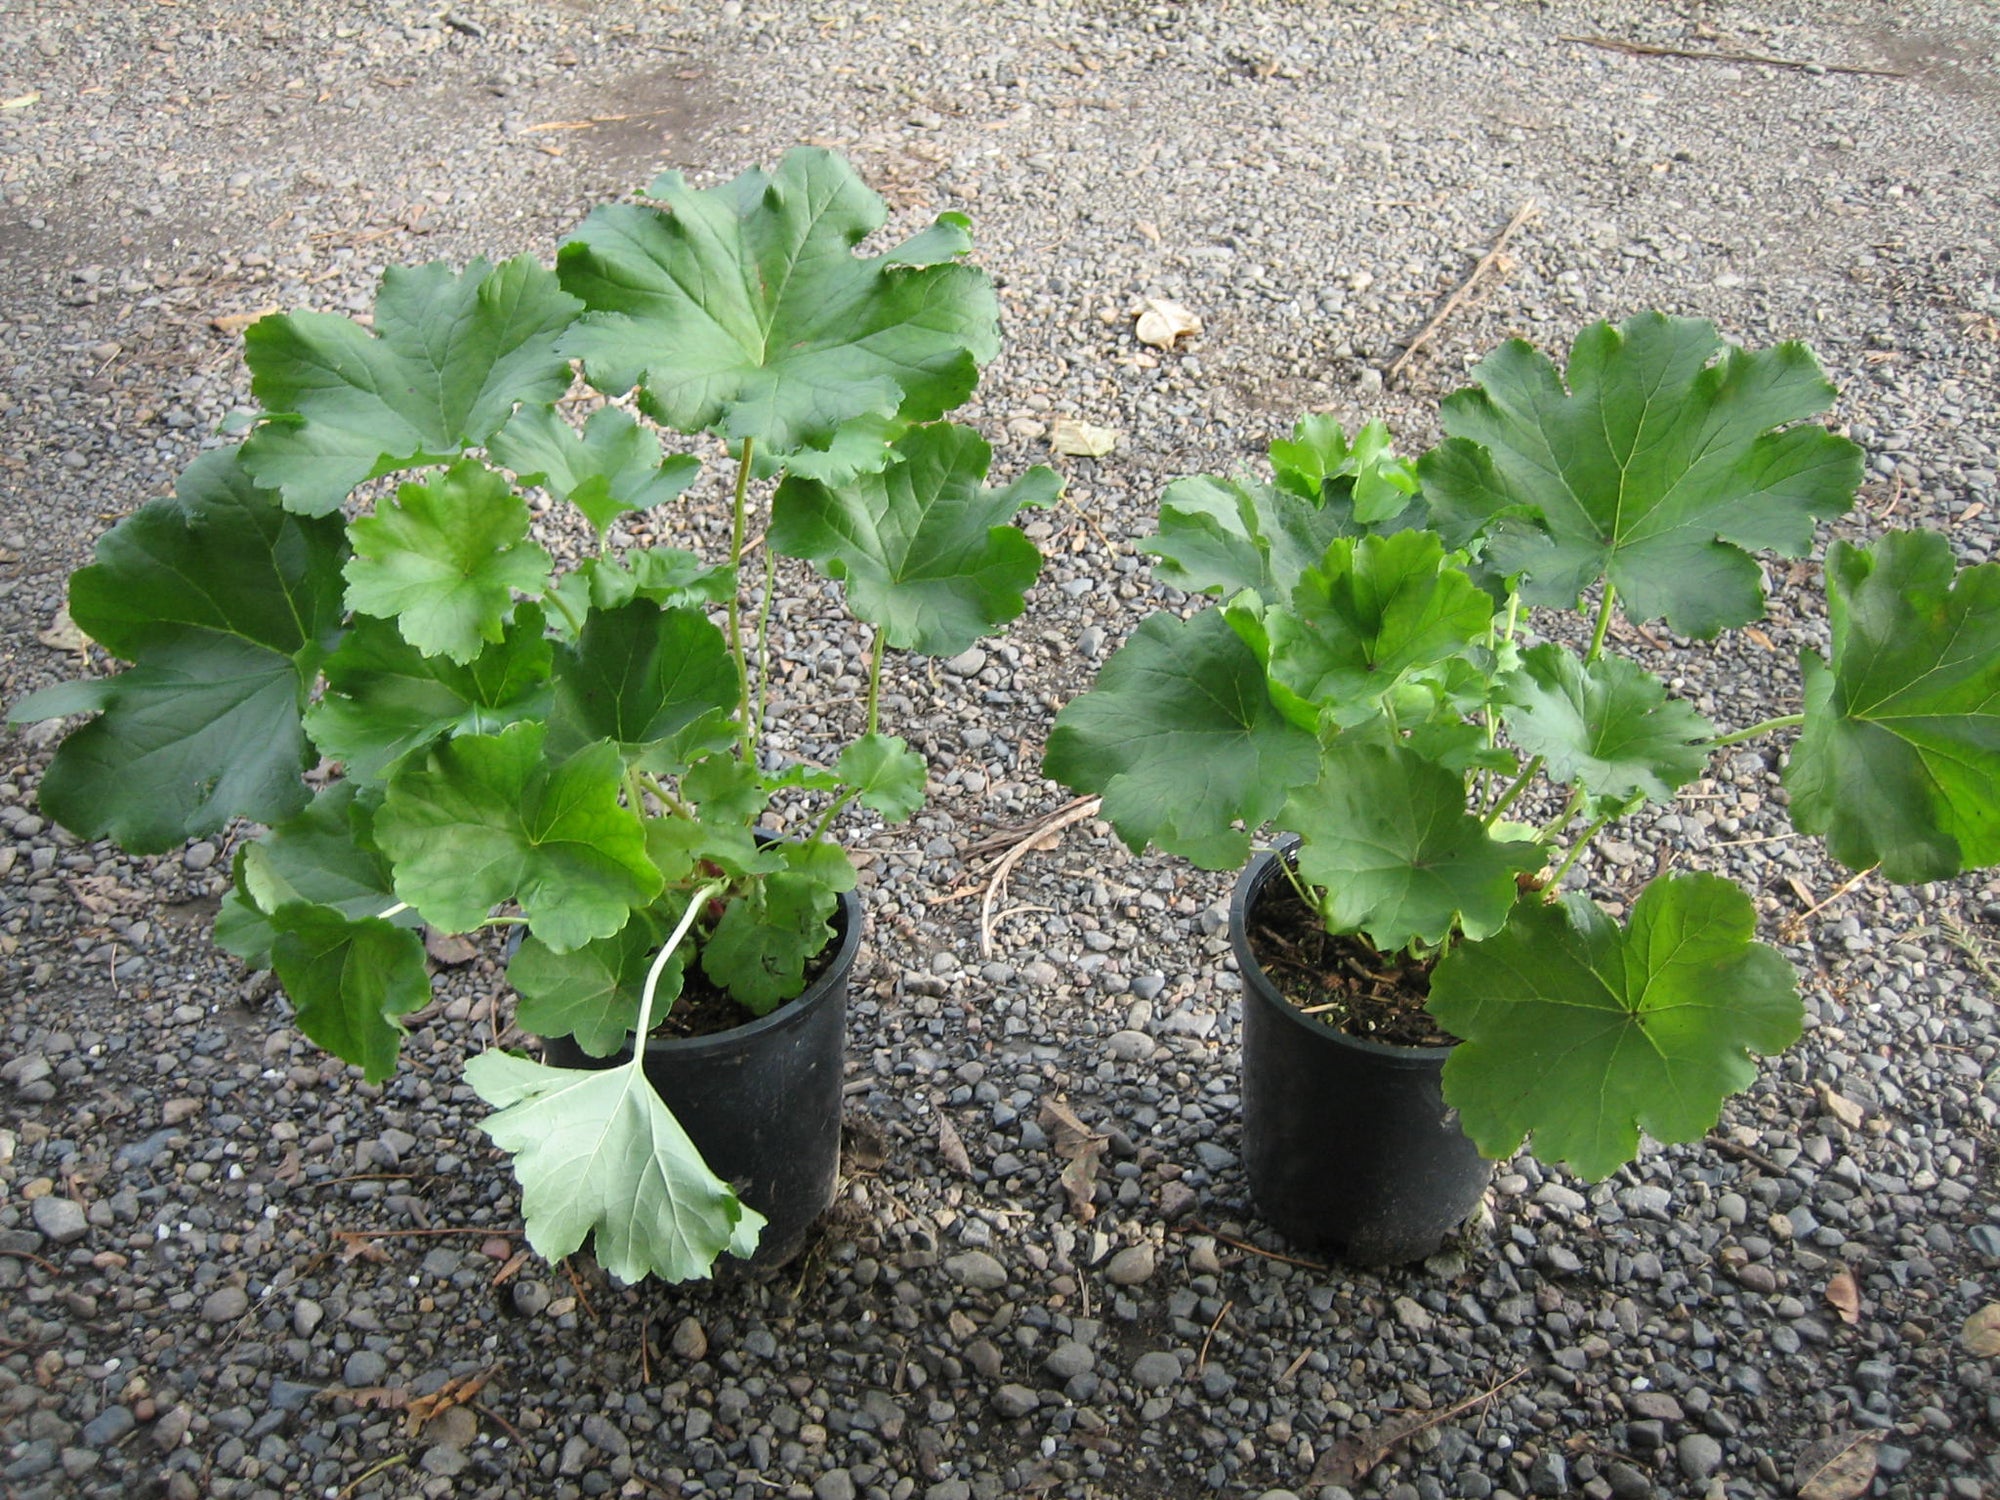 Two young umbrella plants in black containers. They have large green leaves, almost cup-like.